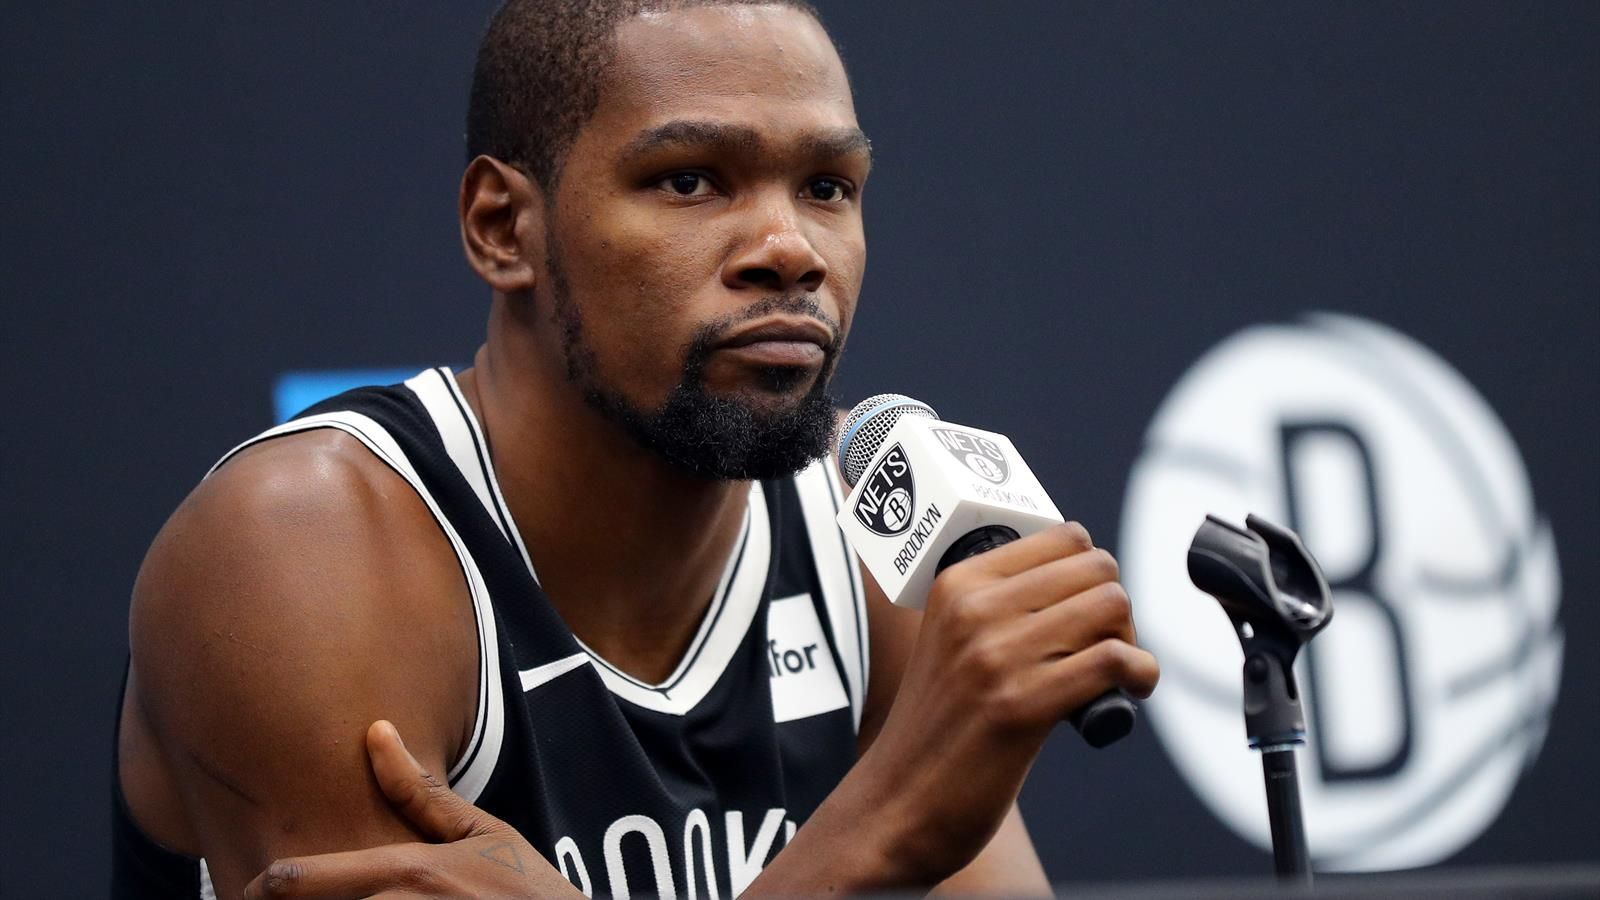 Kevin Durant will not play the NBA season